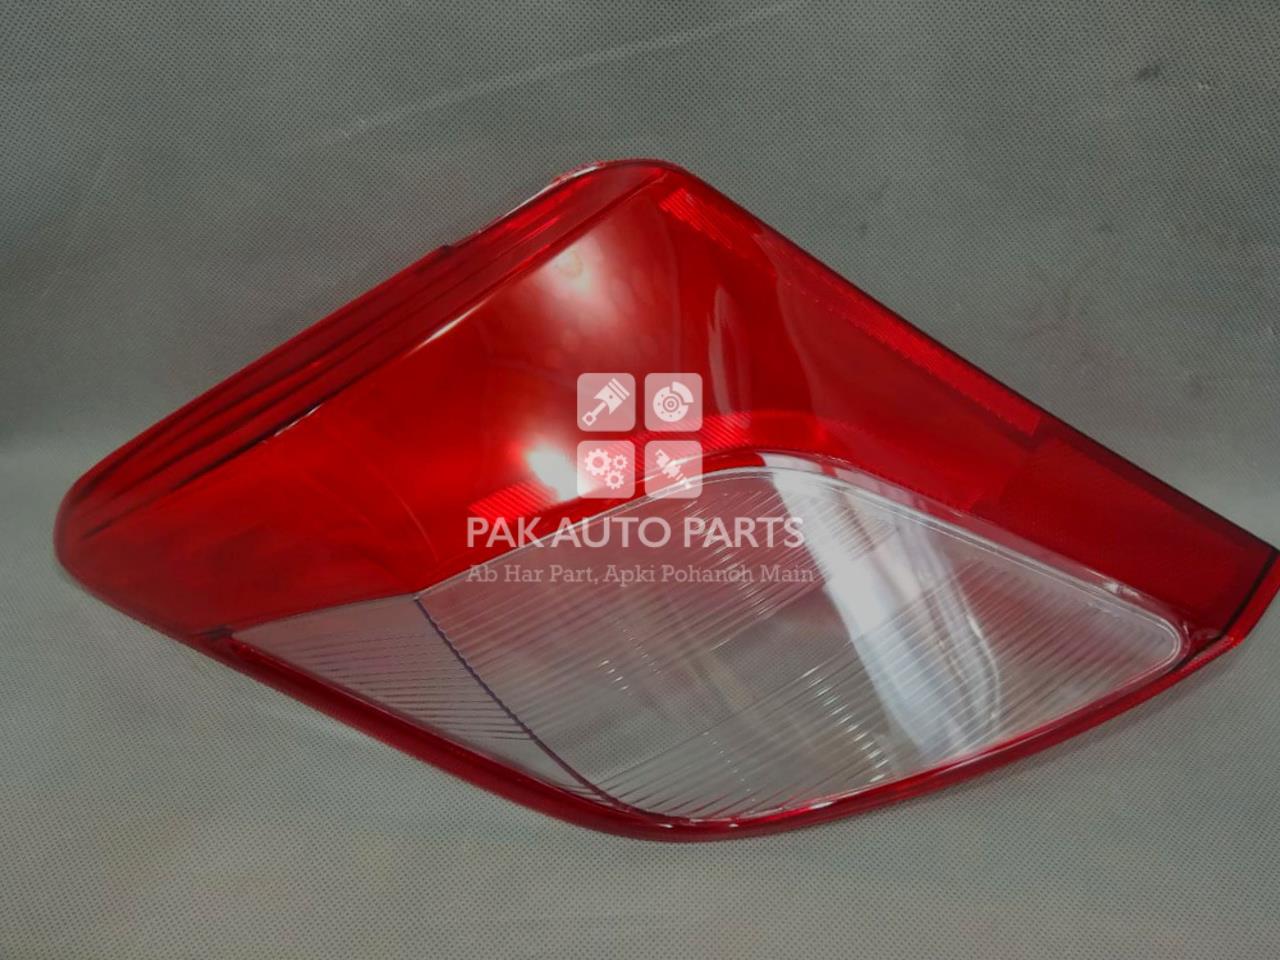 Picture of Toyota Vitz 2012 -2015 Tail Light (Backlight) Cover